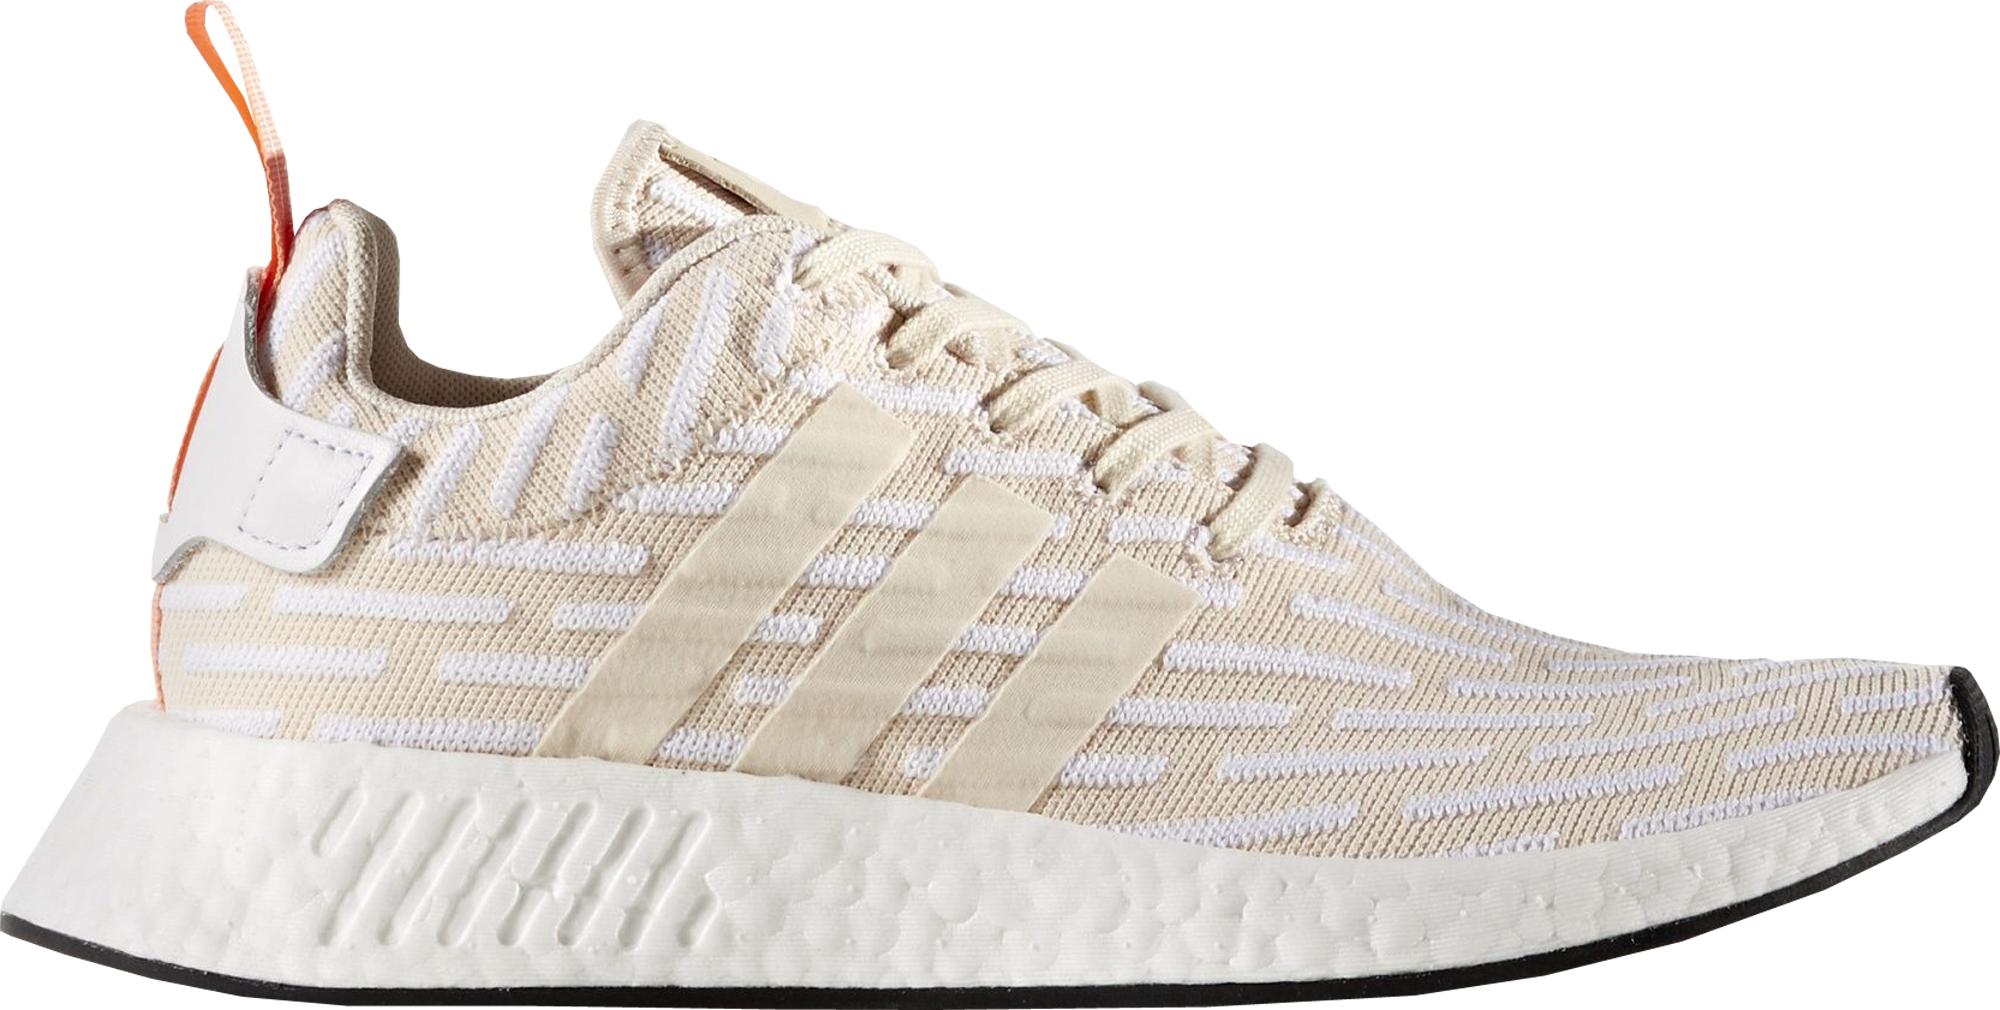 Women's adidas NMD R2 Linen Primeknit Two-Toned